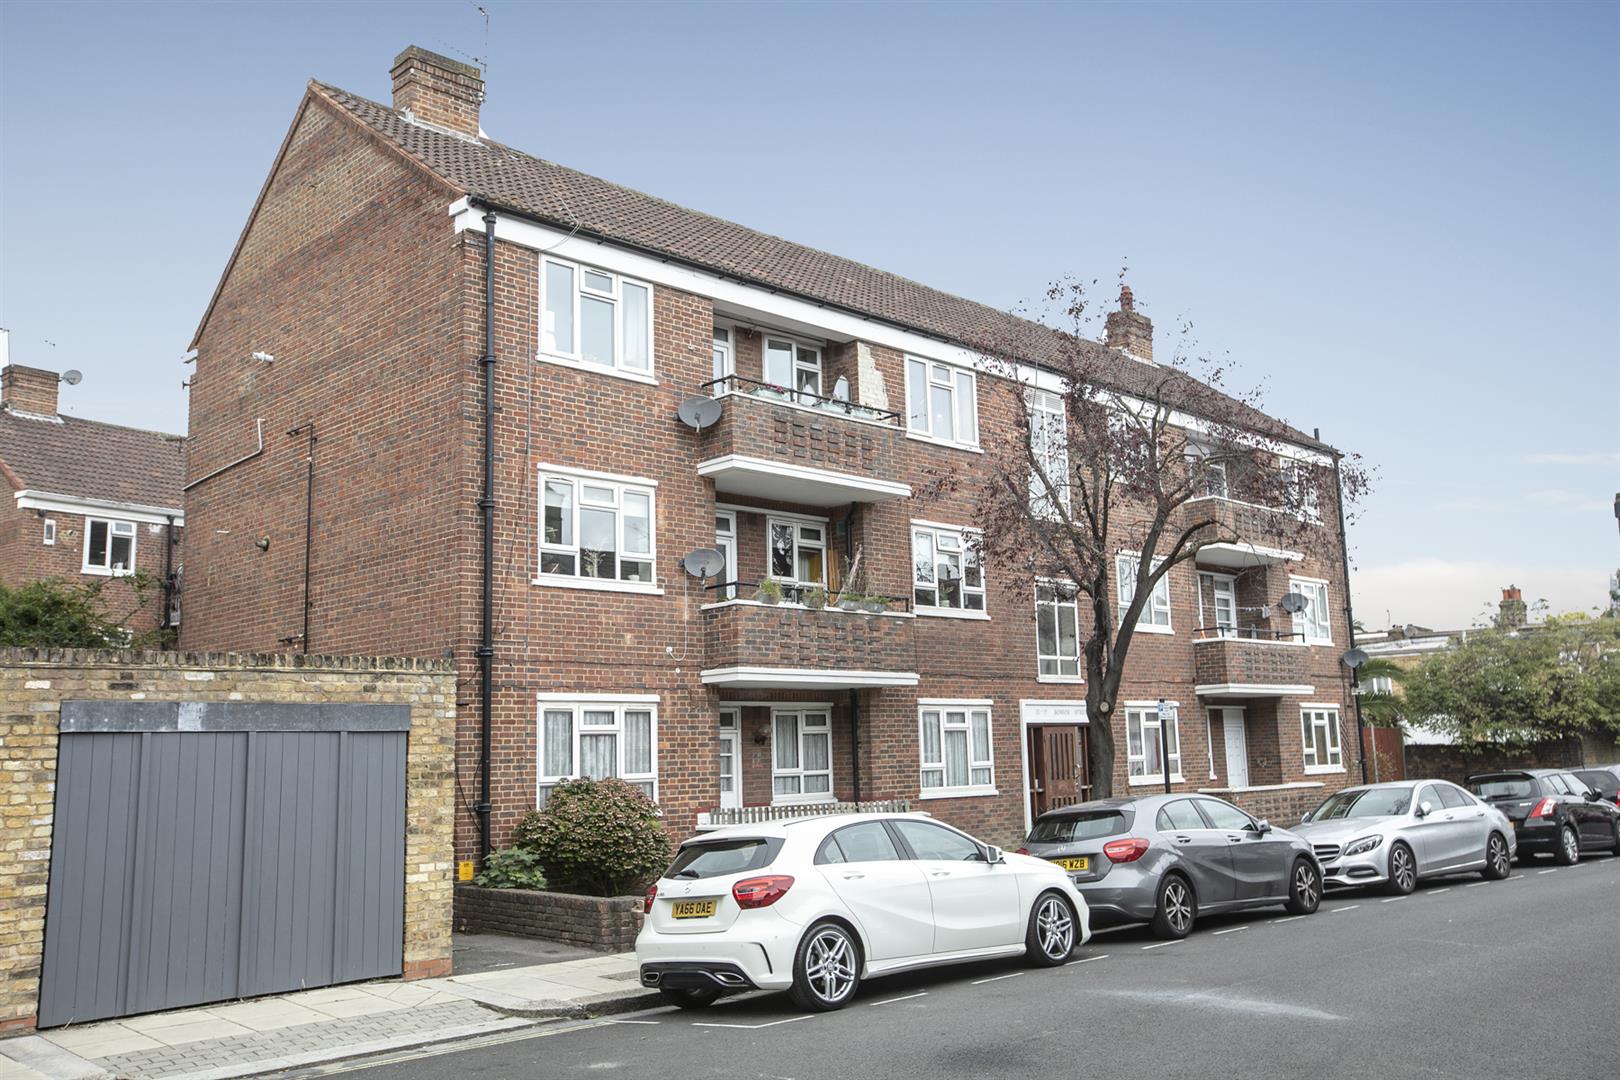 Flat - Purpose Built For Sale in Bonsor Street, Camberwell, SE5 870 view3